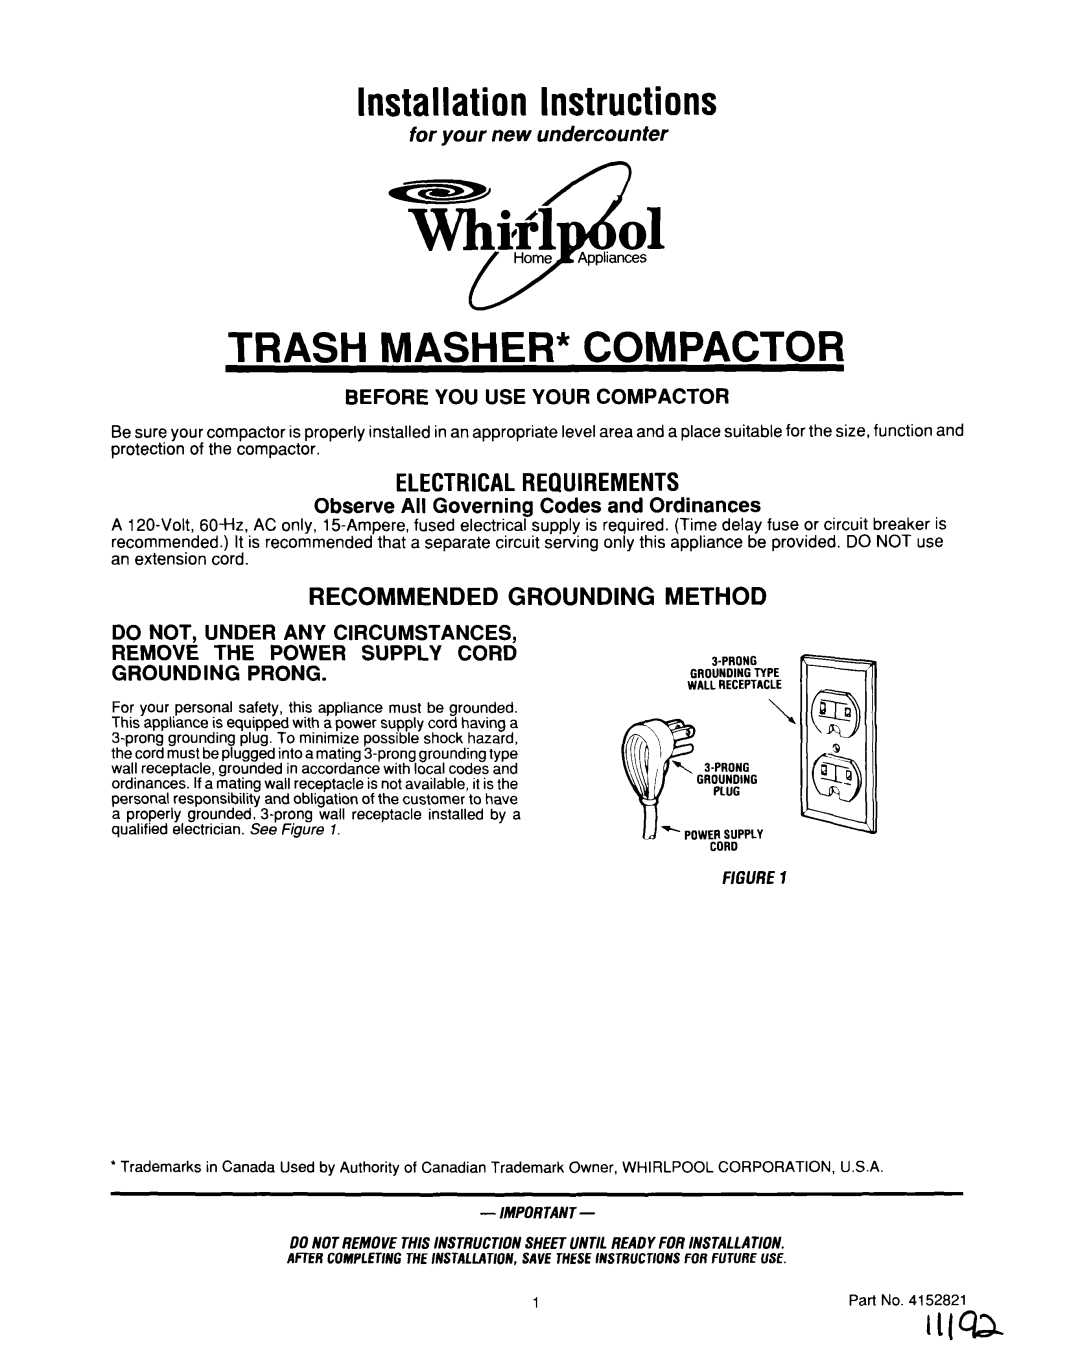 Whirlpool 4152821 installation instructions for your new undercounter, Before You Use Your Compactor, Method 